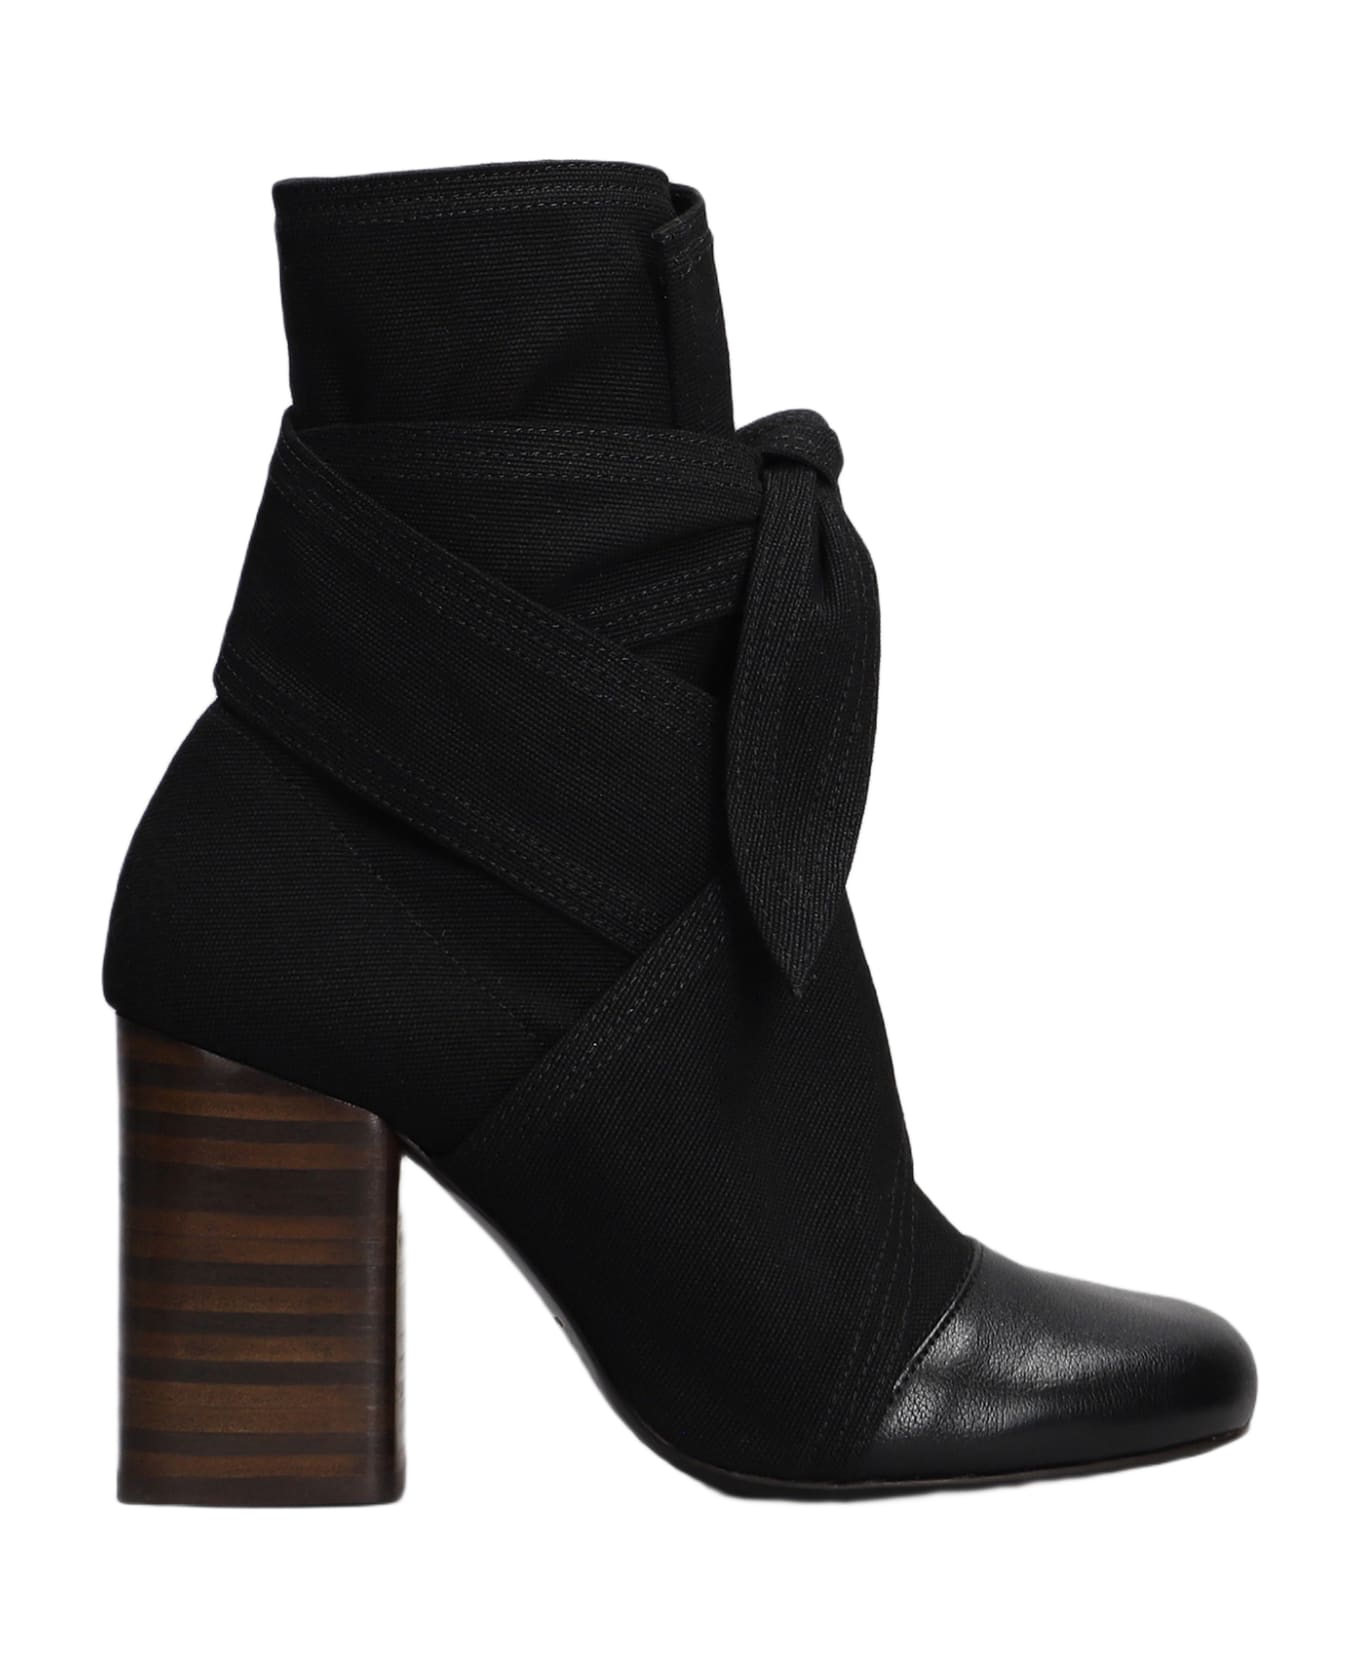 Lemaire High Heels Ankle Boots In Black Fabric - black ブーツ